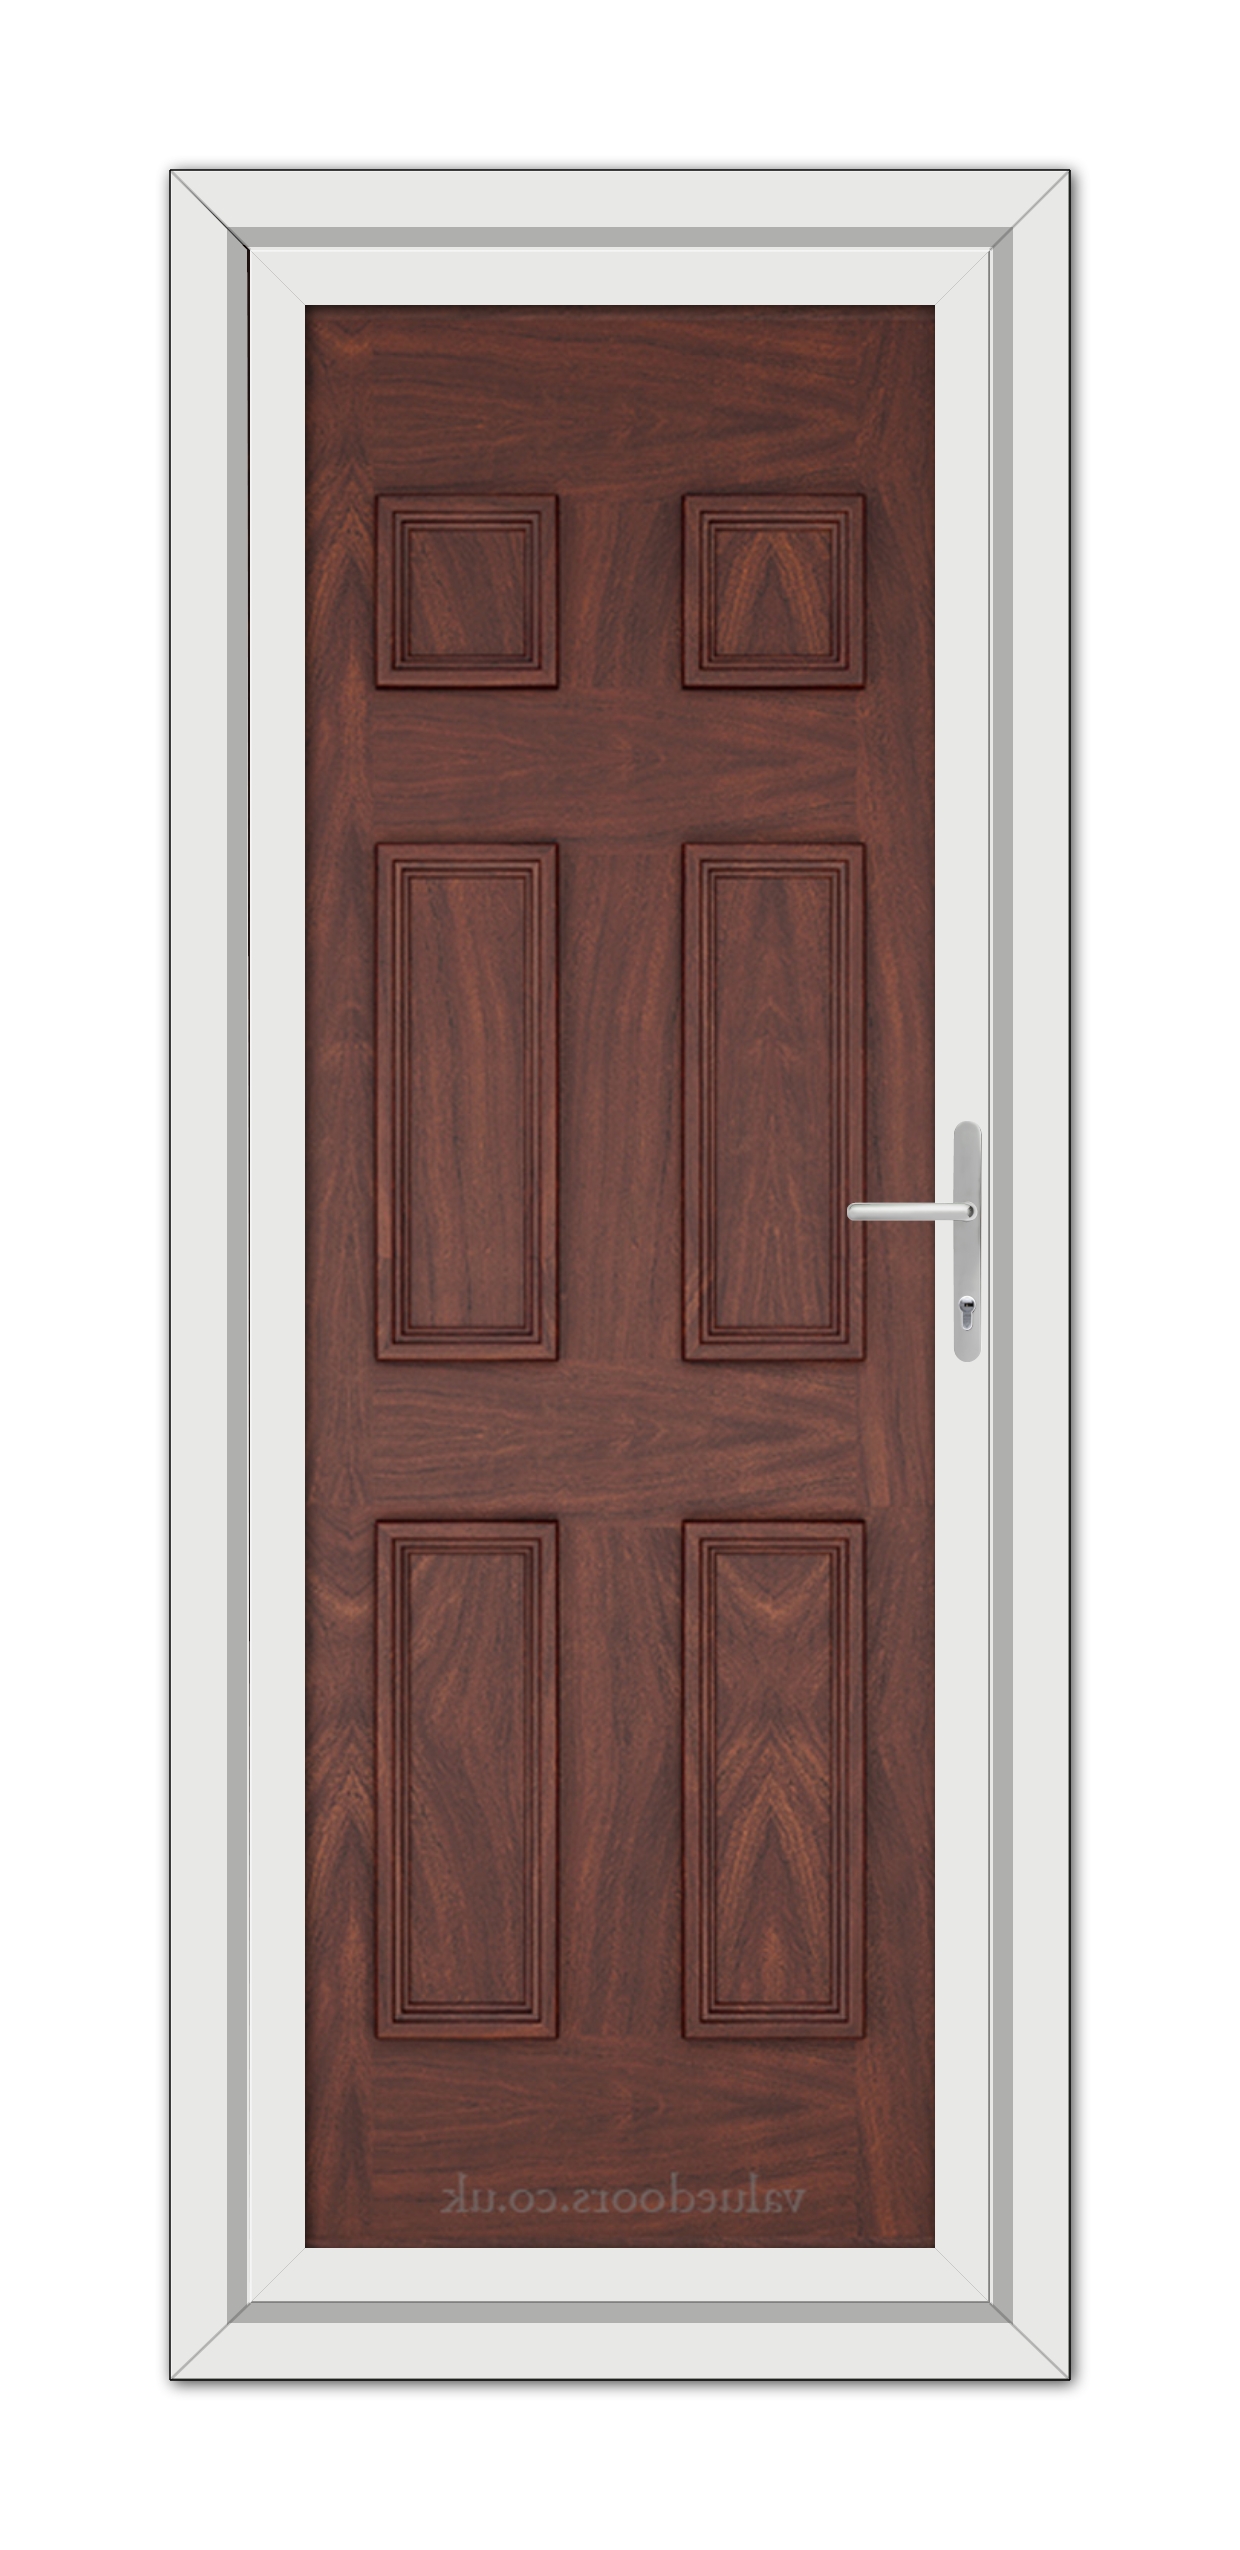 A modern Rosewood Windsor Solid uPVC door with six panels and a silver handle, framed by a white doorframe.